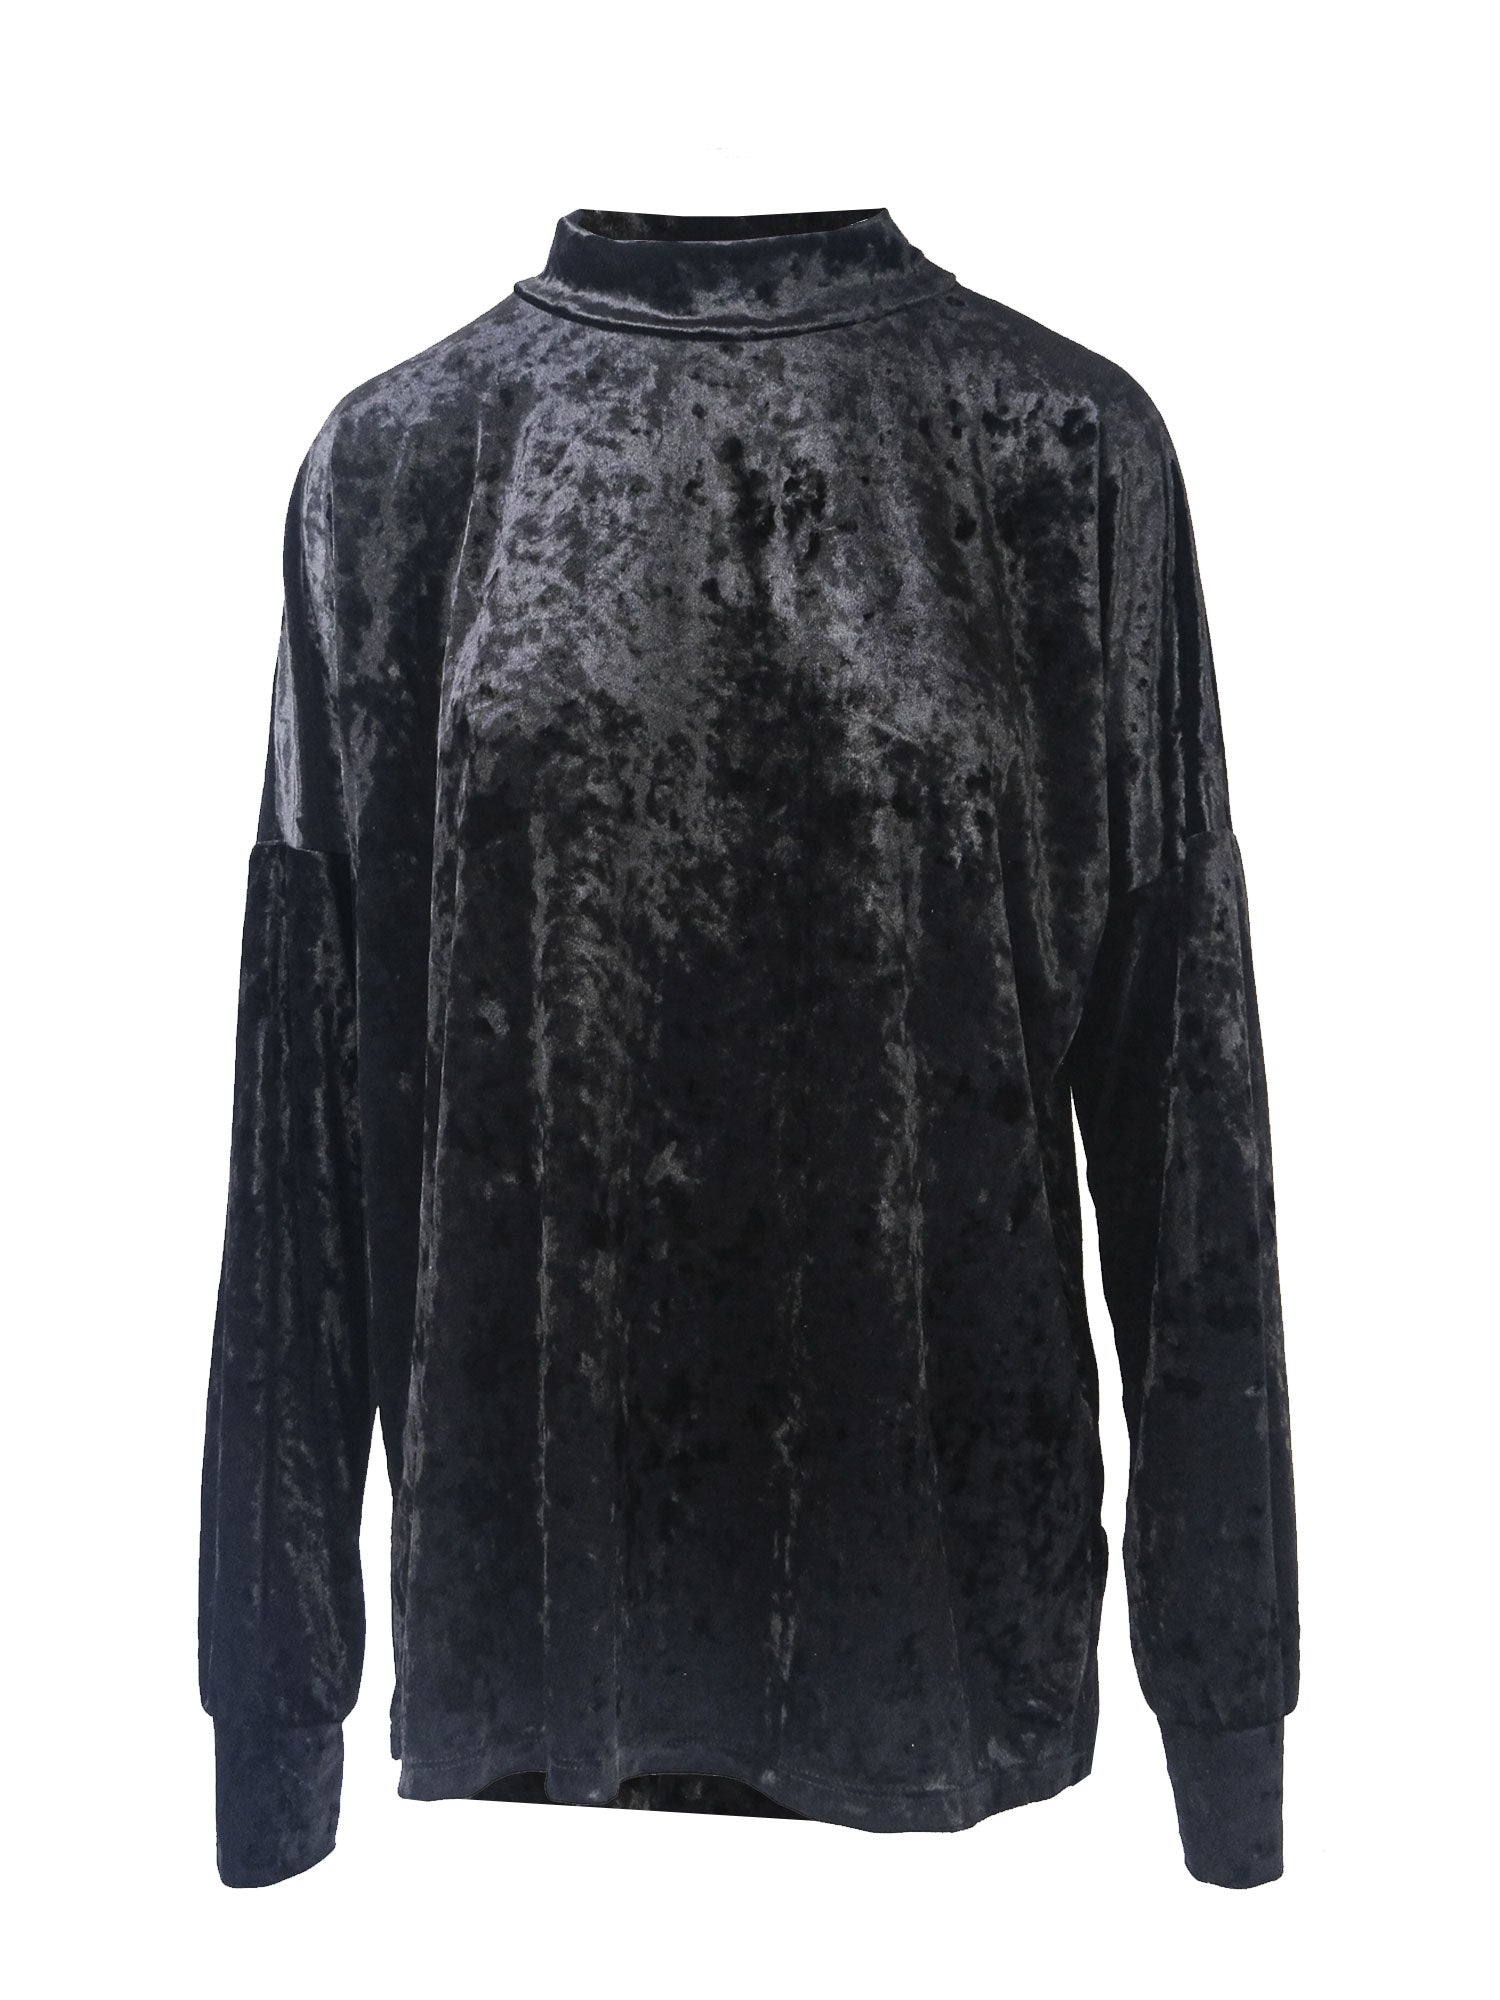 FLORENCE - sweatshirt over with turtleneck in black hammered chenille